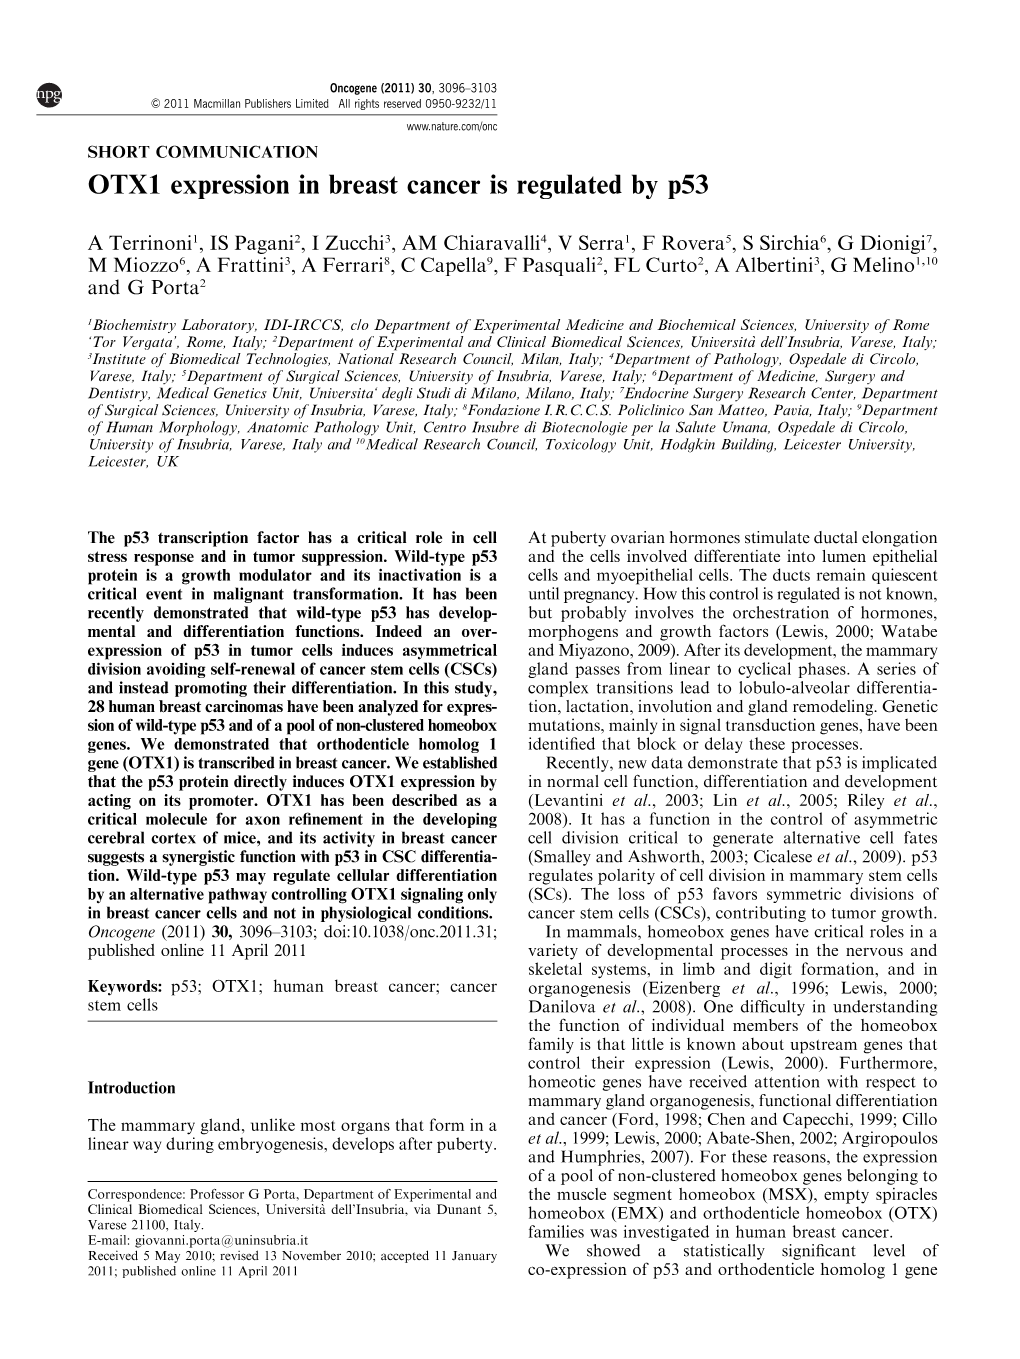 OTX1 Expression in Breast Cancer Is Regulated by P53